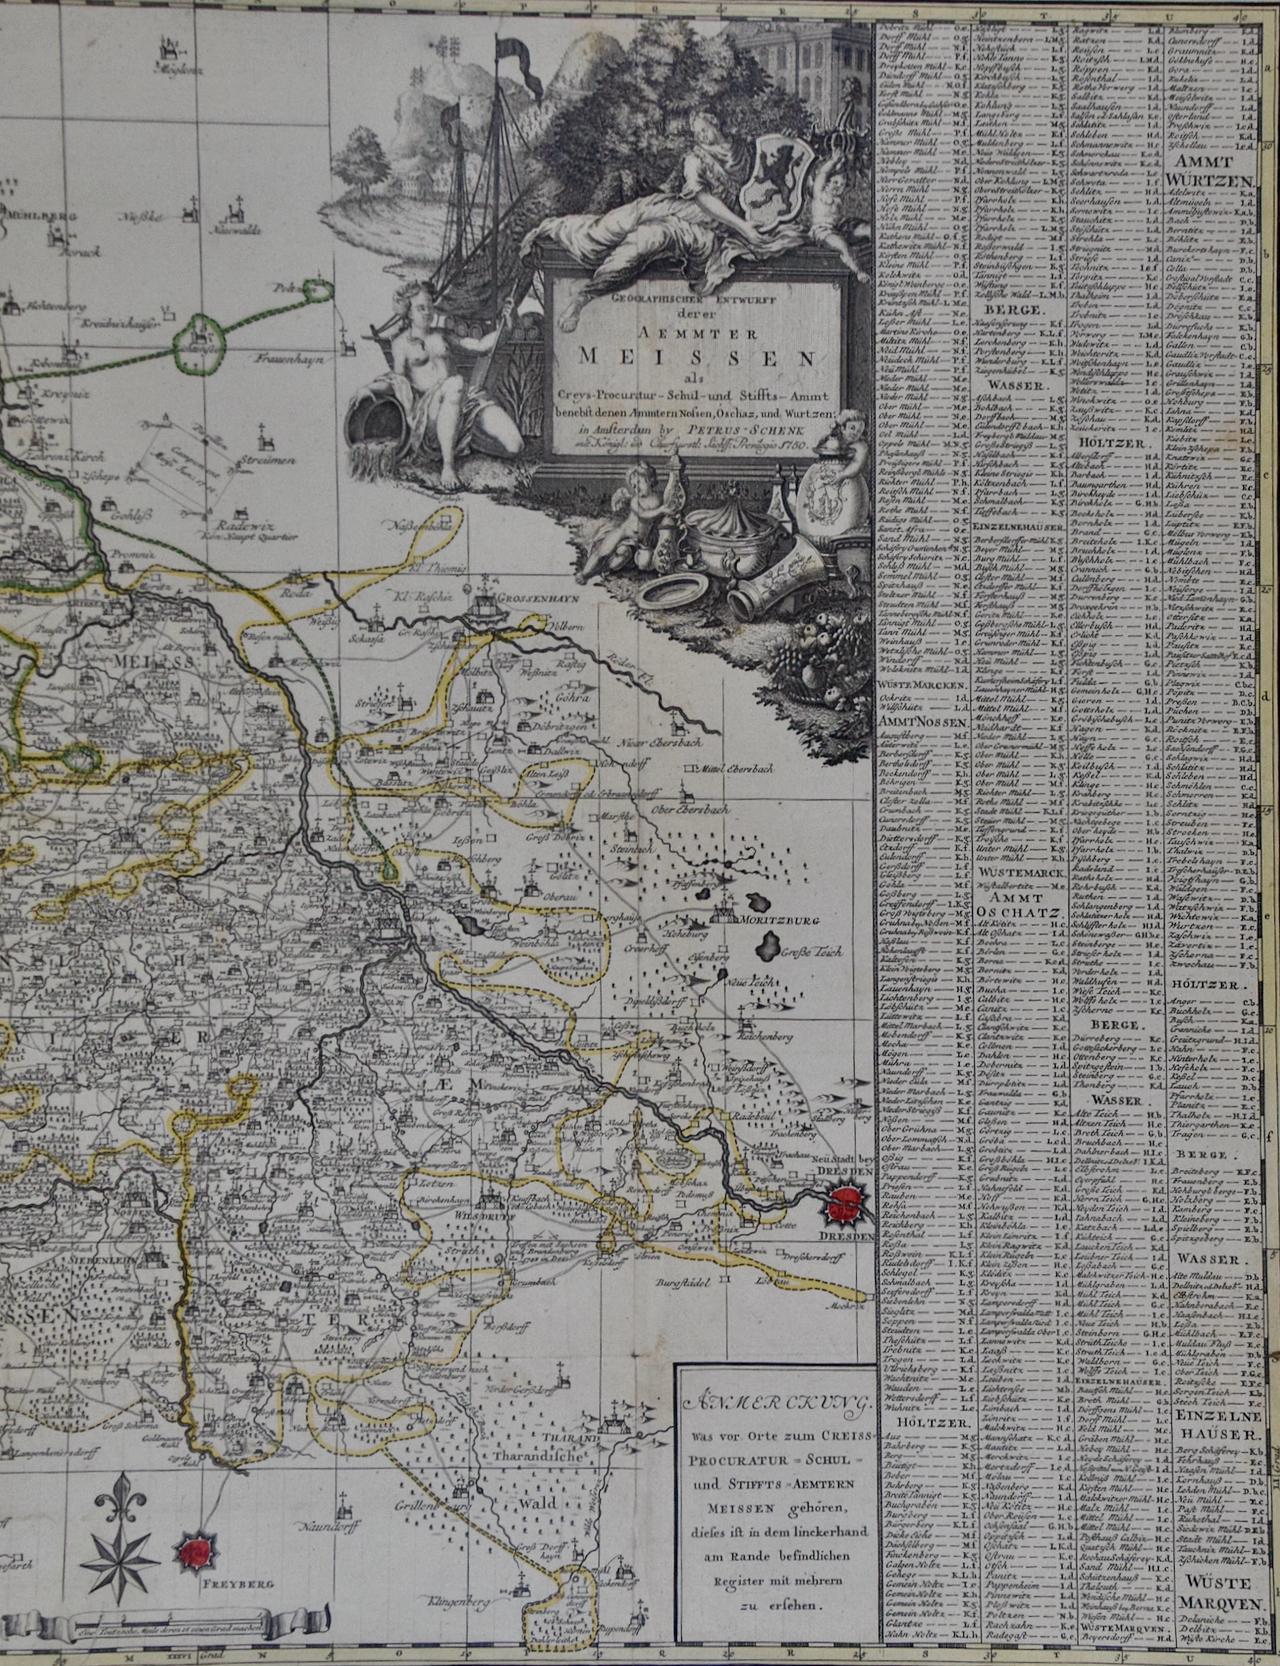 Meissen, Germany : A Large Framed 18th Century Map by Petrus Schenk - Old Masters Print by Petrus Schenk the Younger